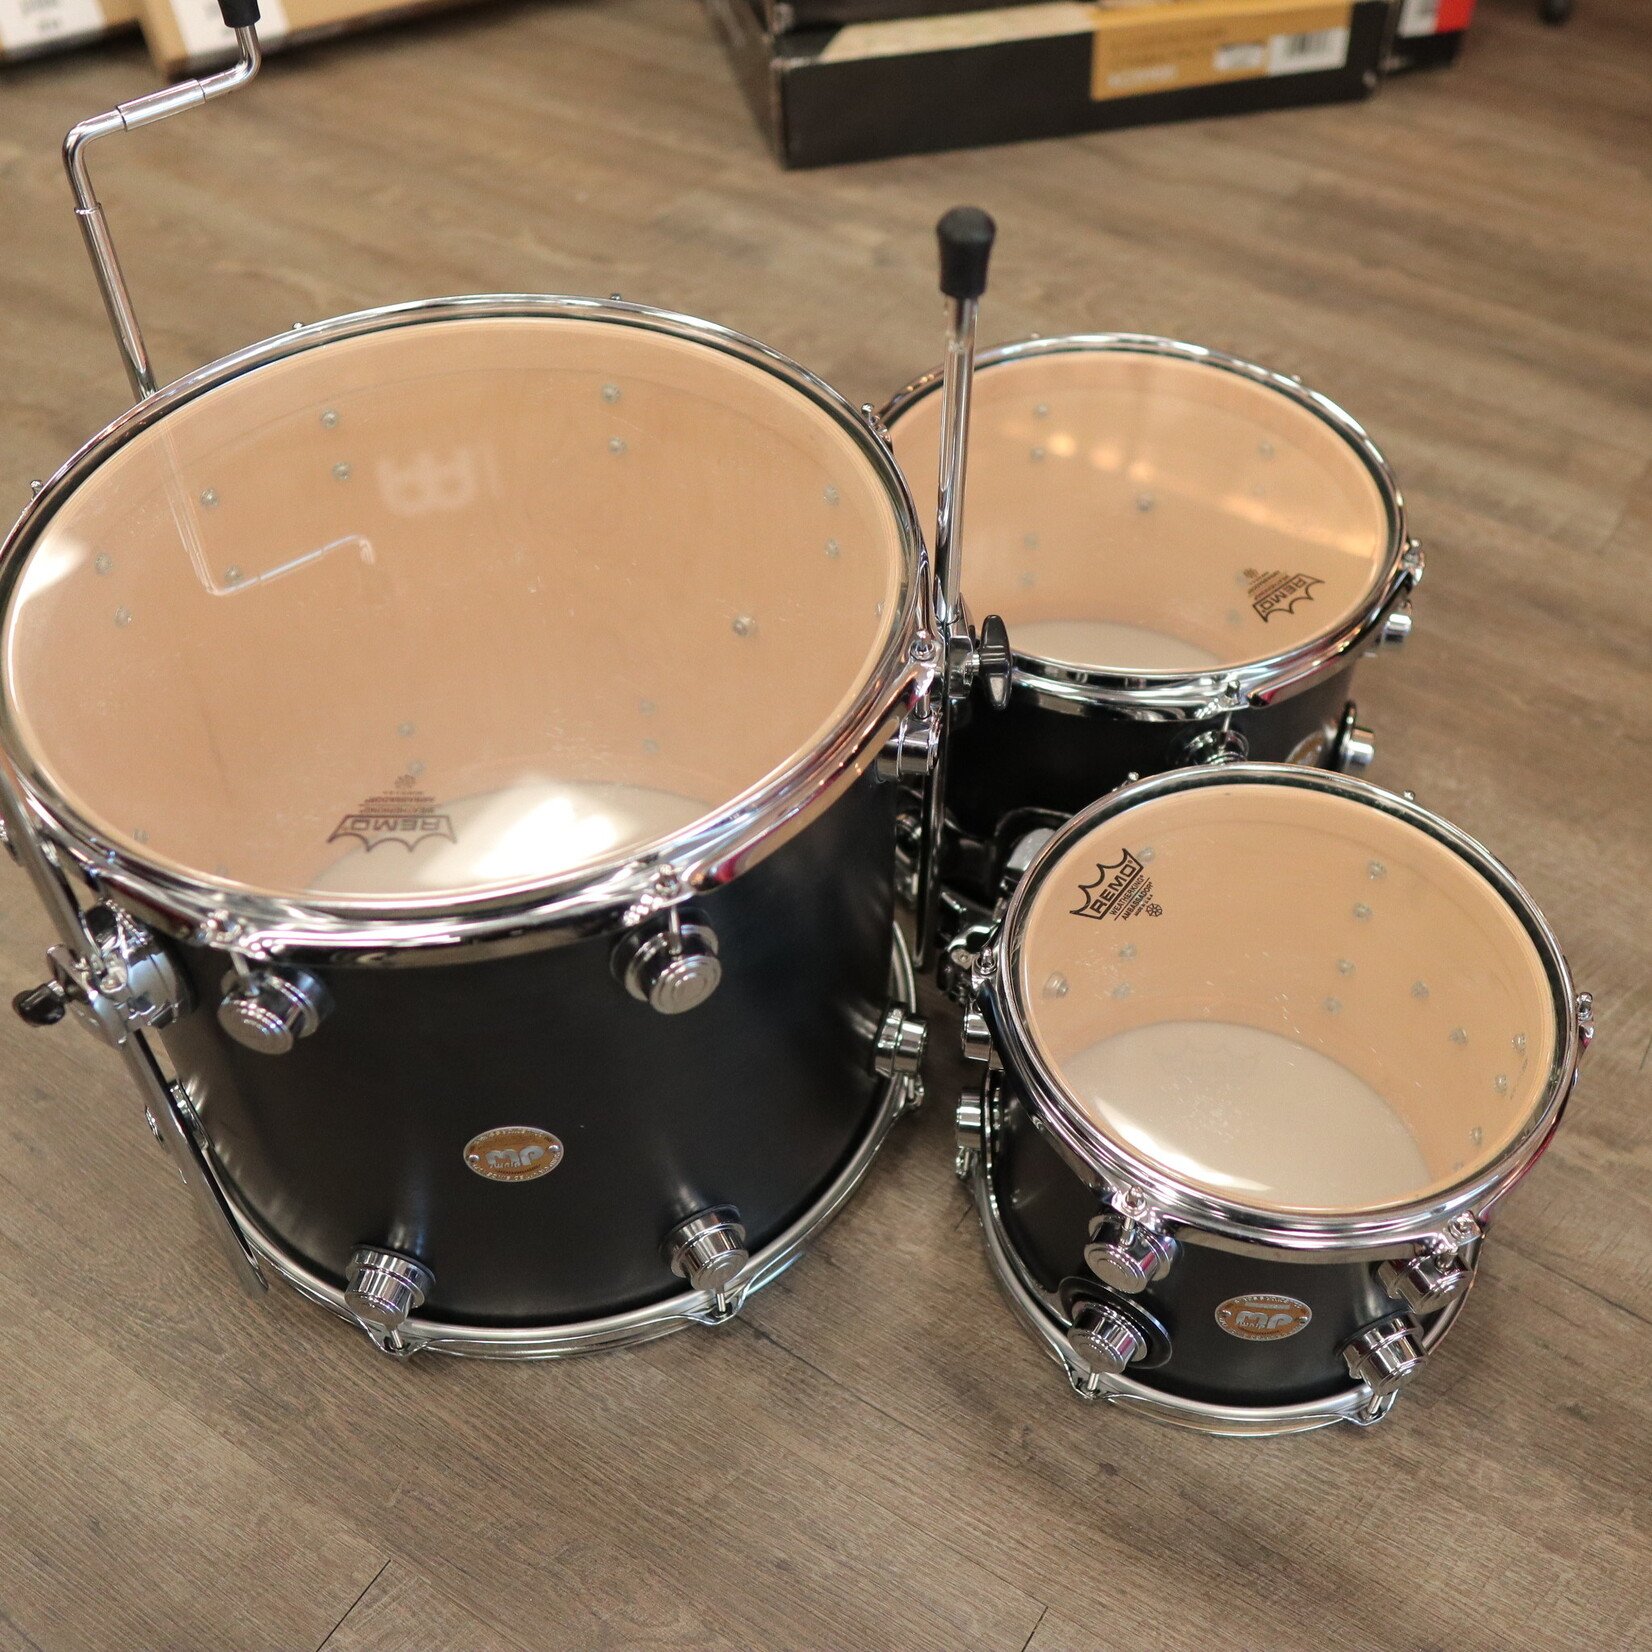 DW Used DW Collector's Series 4-PC Maple Shell Pack 10/12/16/22 (Ebony Stain)